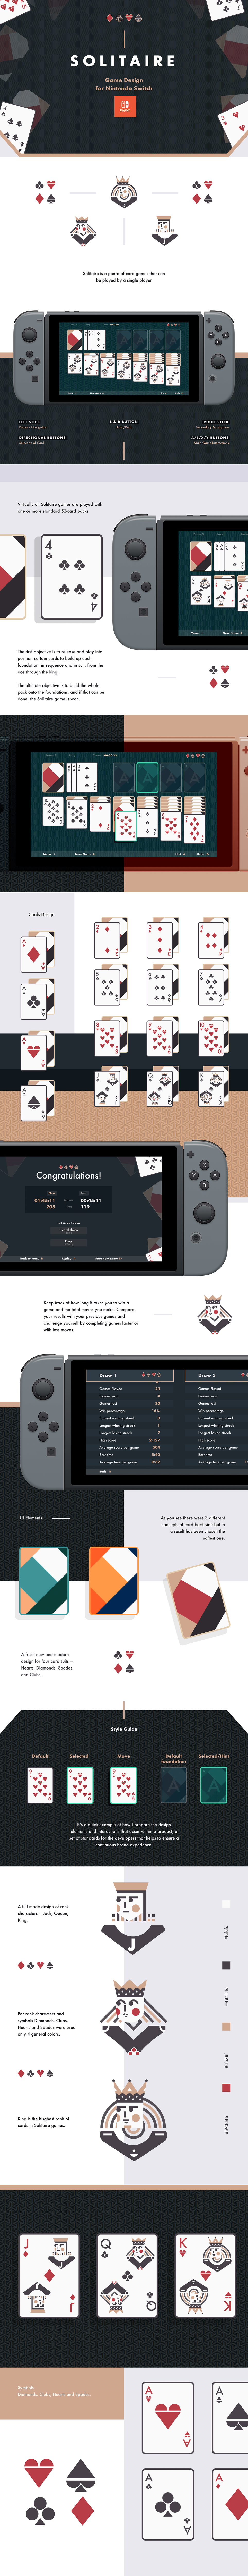 cards game Nintendo player solitair table UI